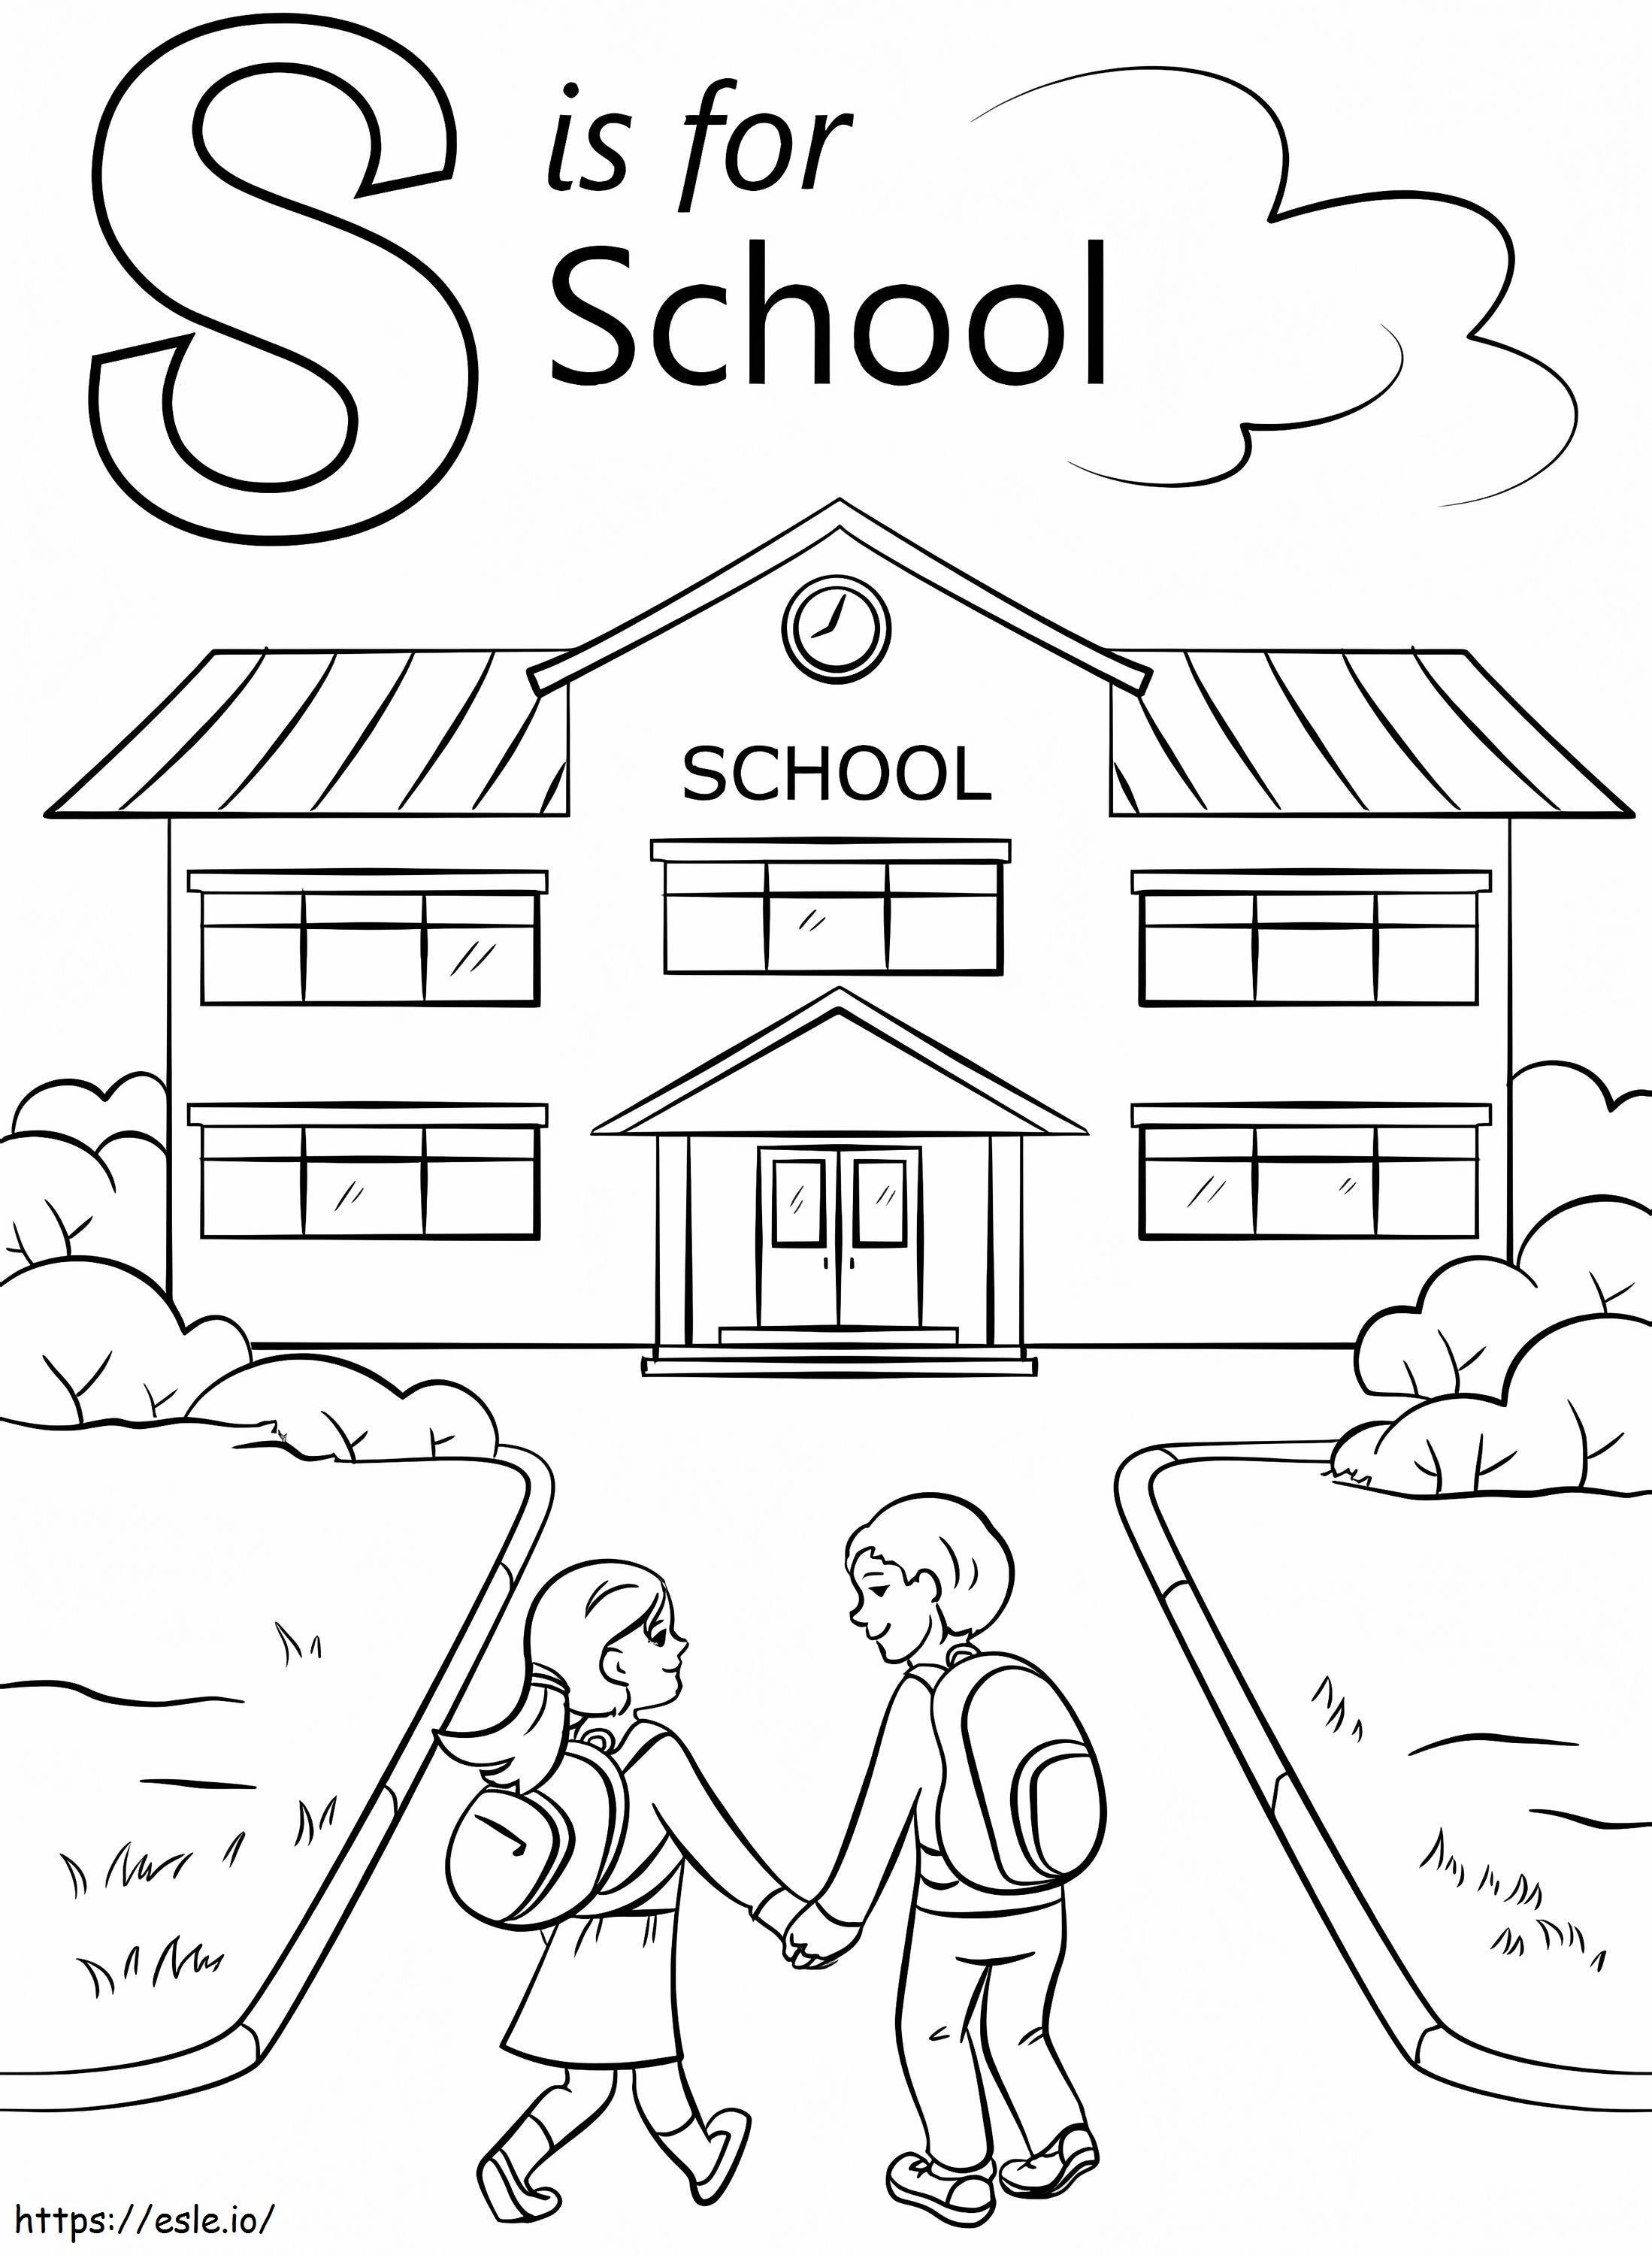 School Letter S coloring page